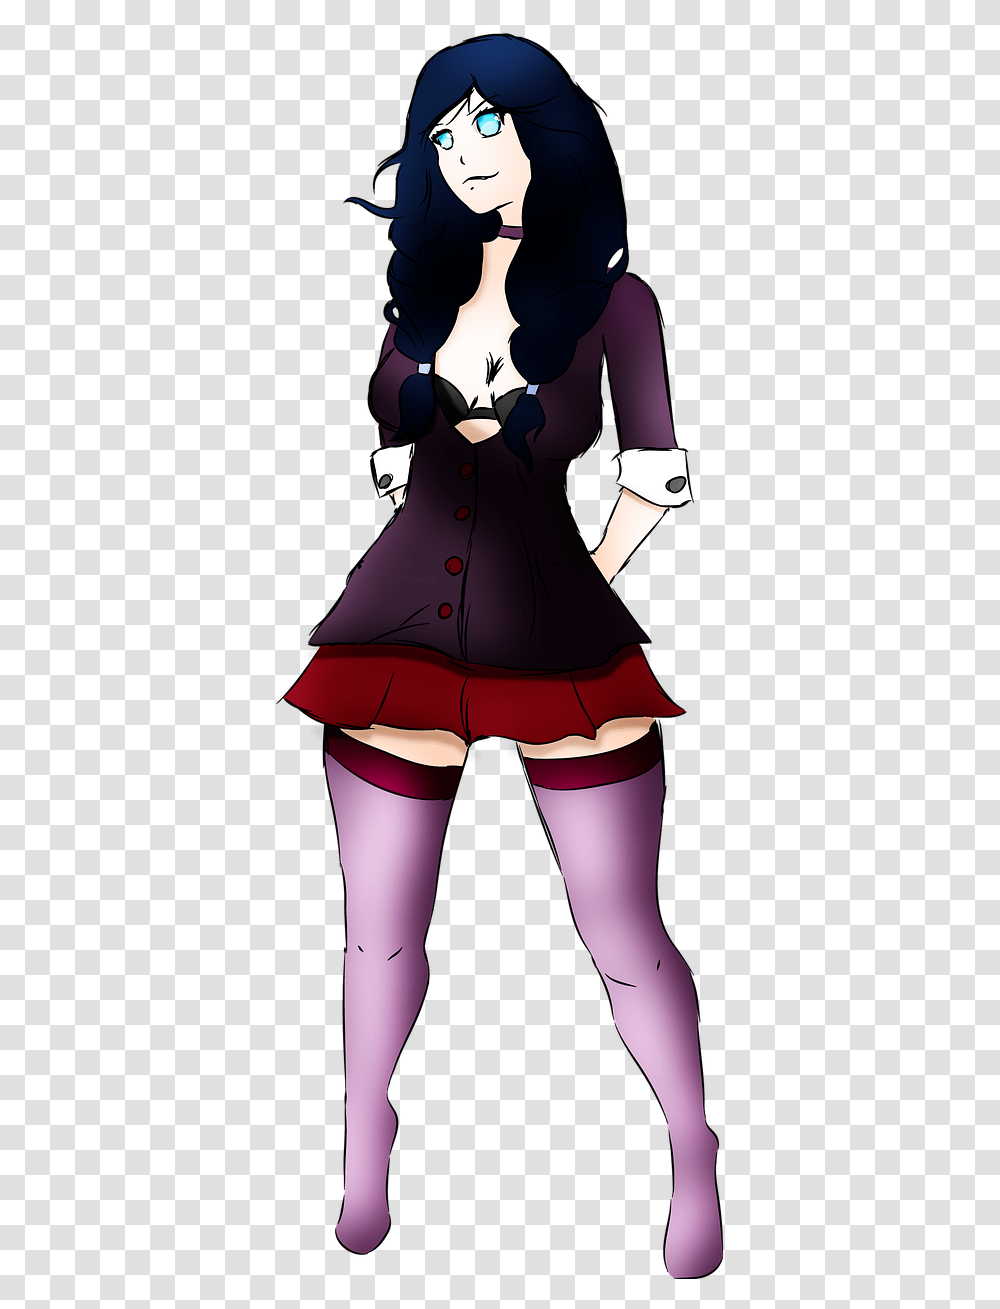 Anime Girl Black Hair School Free Image On Pixabay Goth Anime Girl With Dark Hair, Clothing, Costume, Person, Graphics Transparent Png